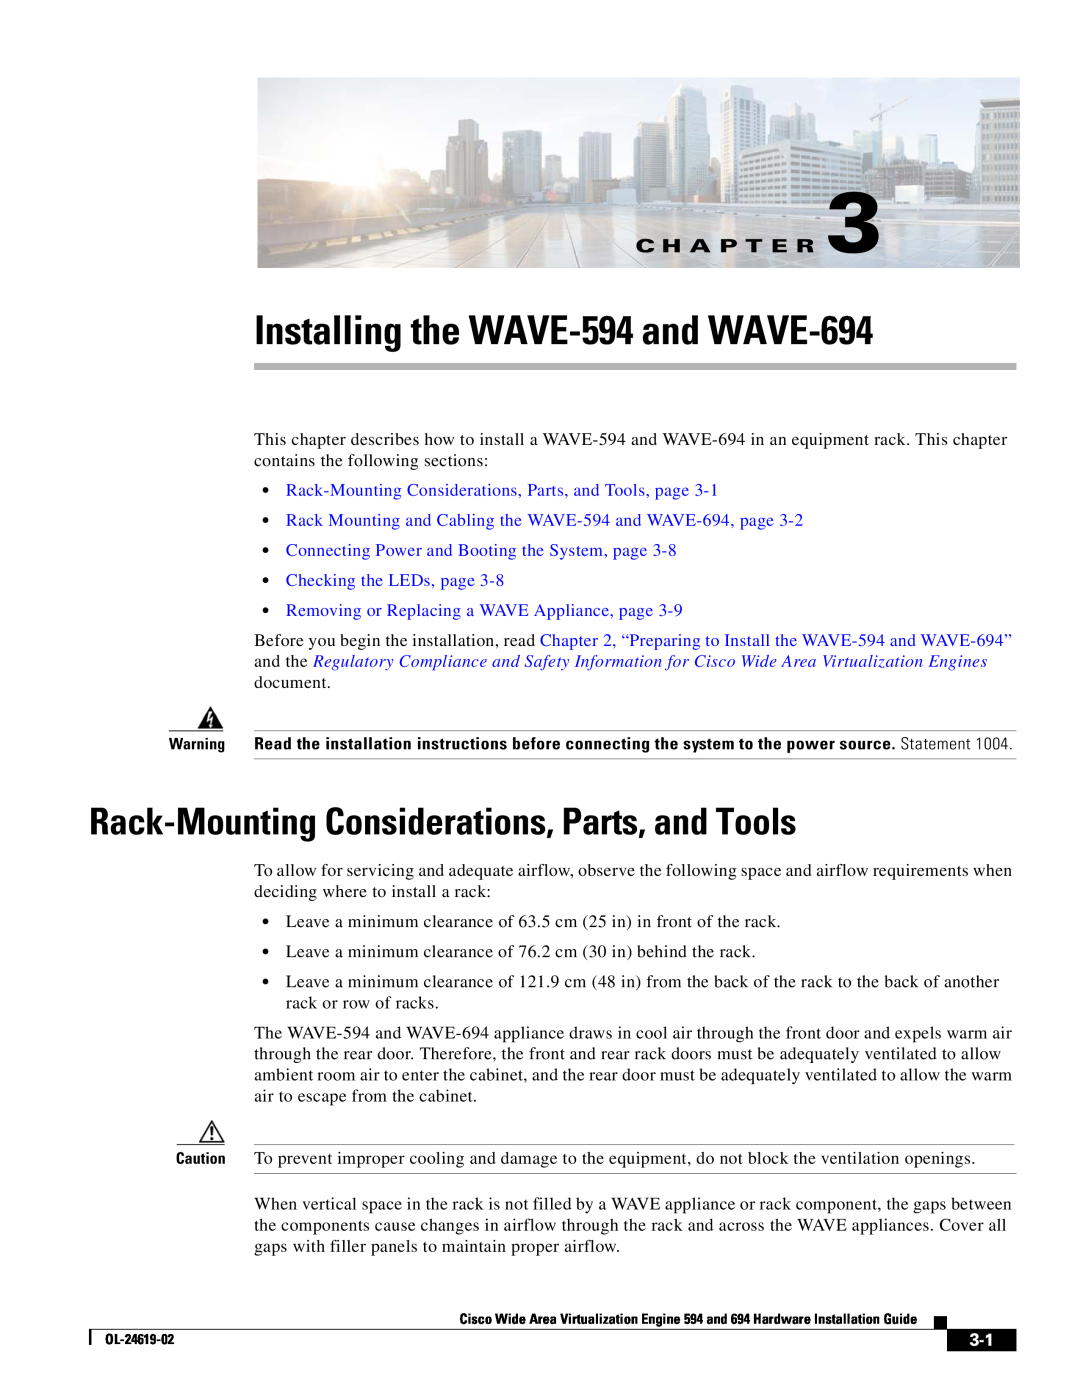 Cisco Systems manual Installing the WAVE-594 and WAVE-694, Rack-Mounting Considerations, Parts, and Tools, C H A P T E R 